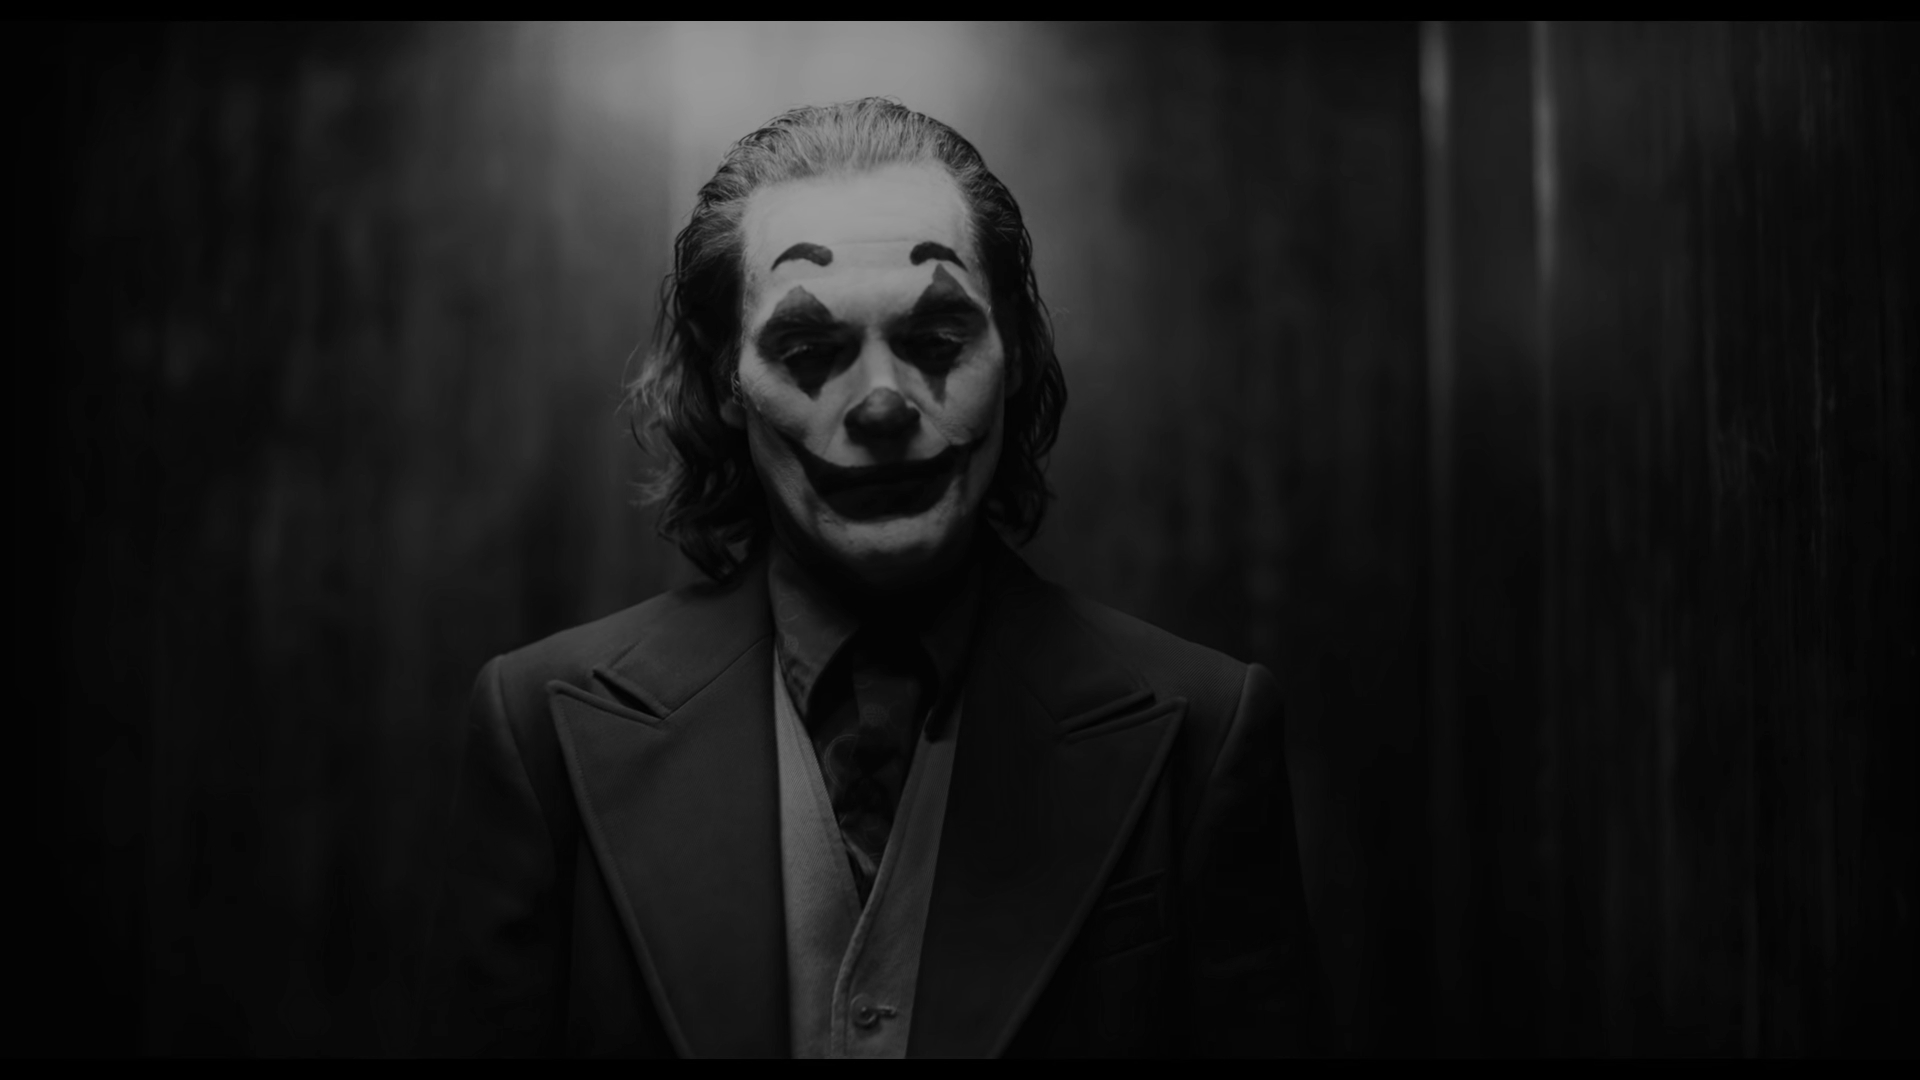 540x960169220 Joaquin Phoenix As Joker Monochrome 540x960169220 Resolution  Wallpaper, HD Movies 4K Wallpapers, Images, Photos and Background -  Wallpapers Den